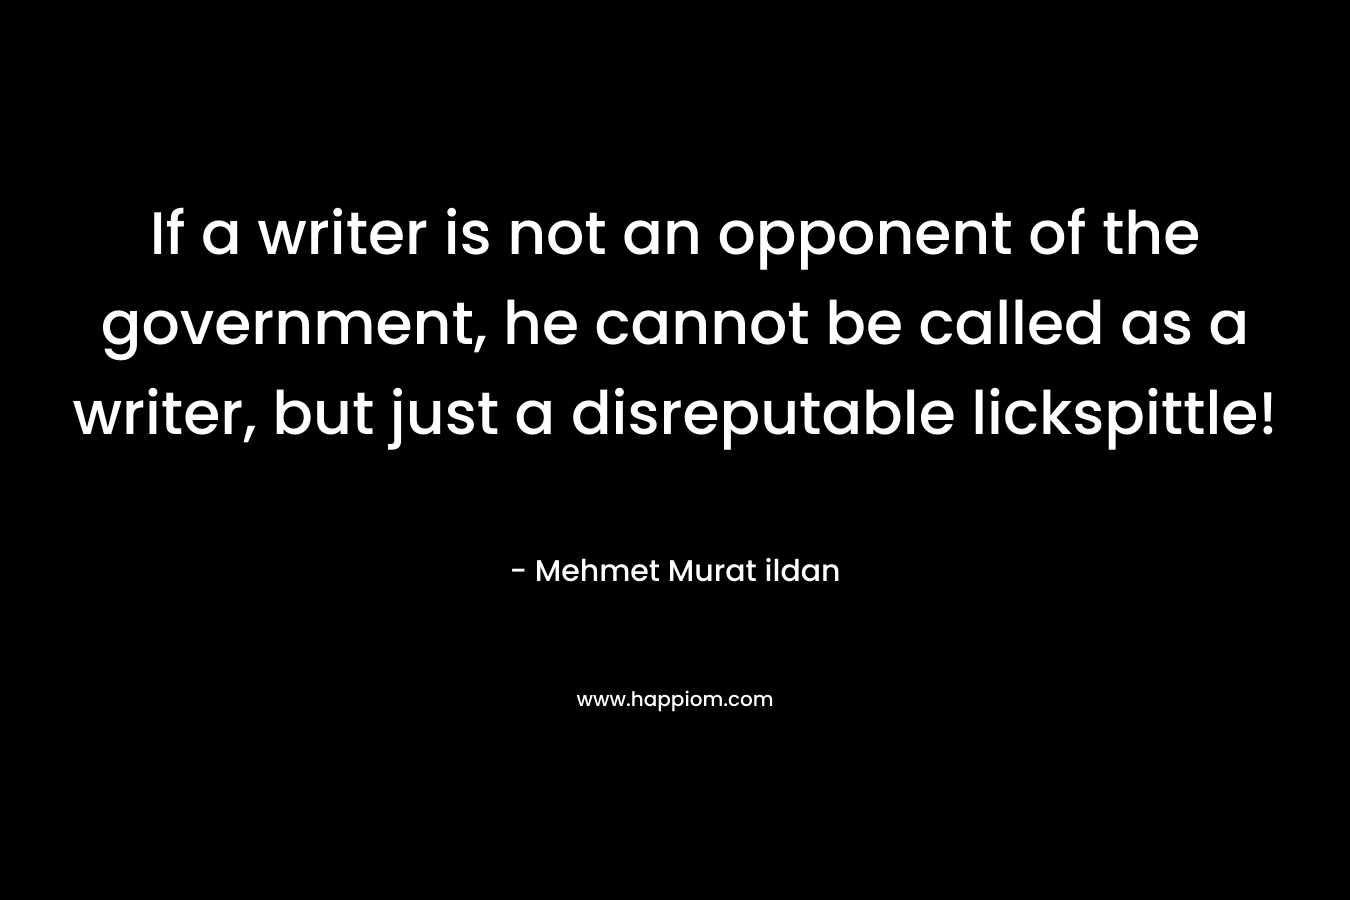 If a writer is not an opponent of the government, he cannot be called as a writer, but just a disreputable lickspittle! – Mehmet Murat ildan